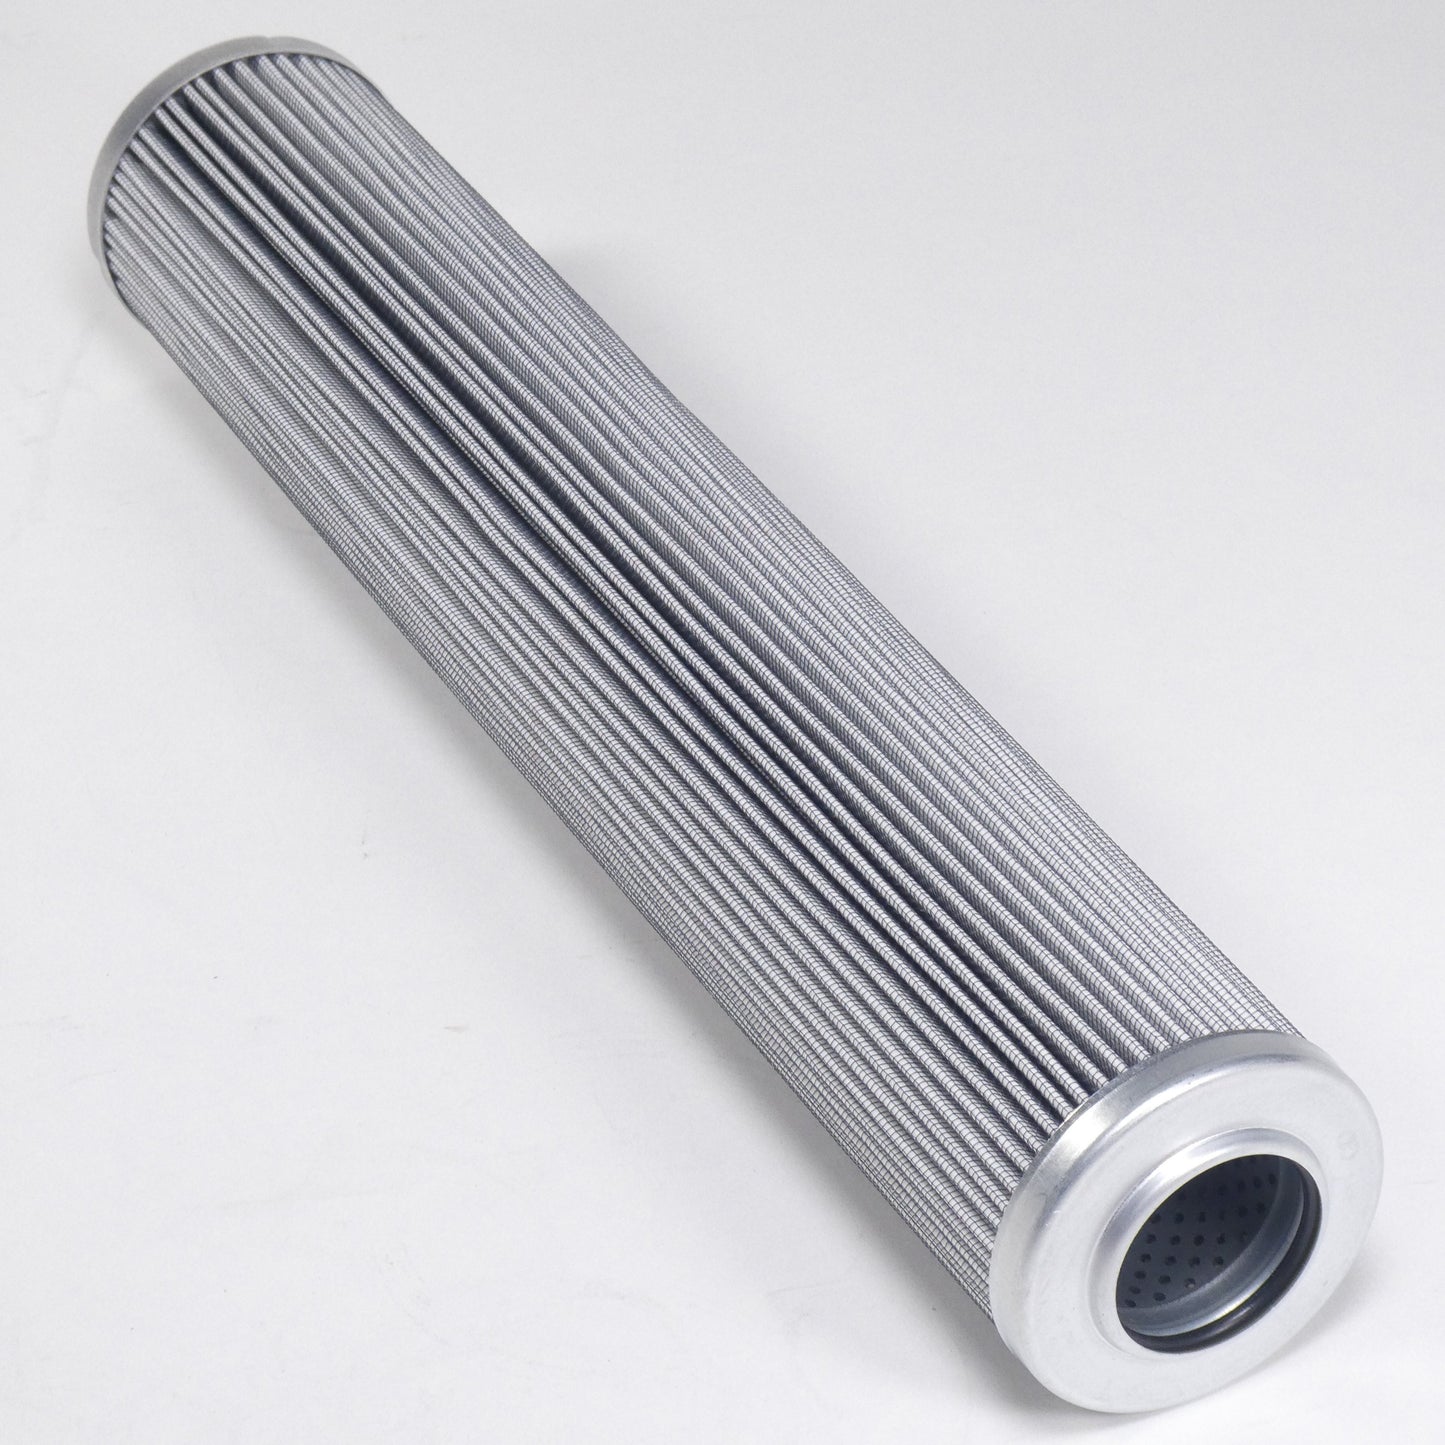 Hydrafil Replacement Filter Element for Taisei Kogyo P-S-H6-10U